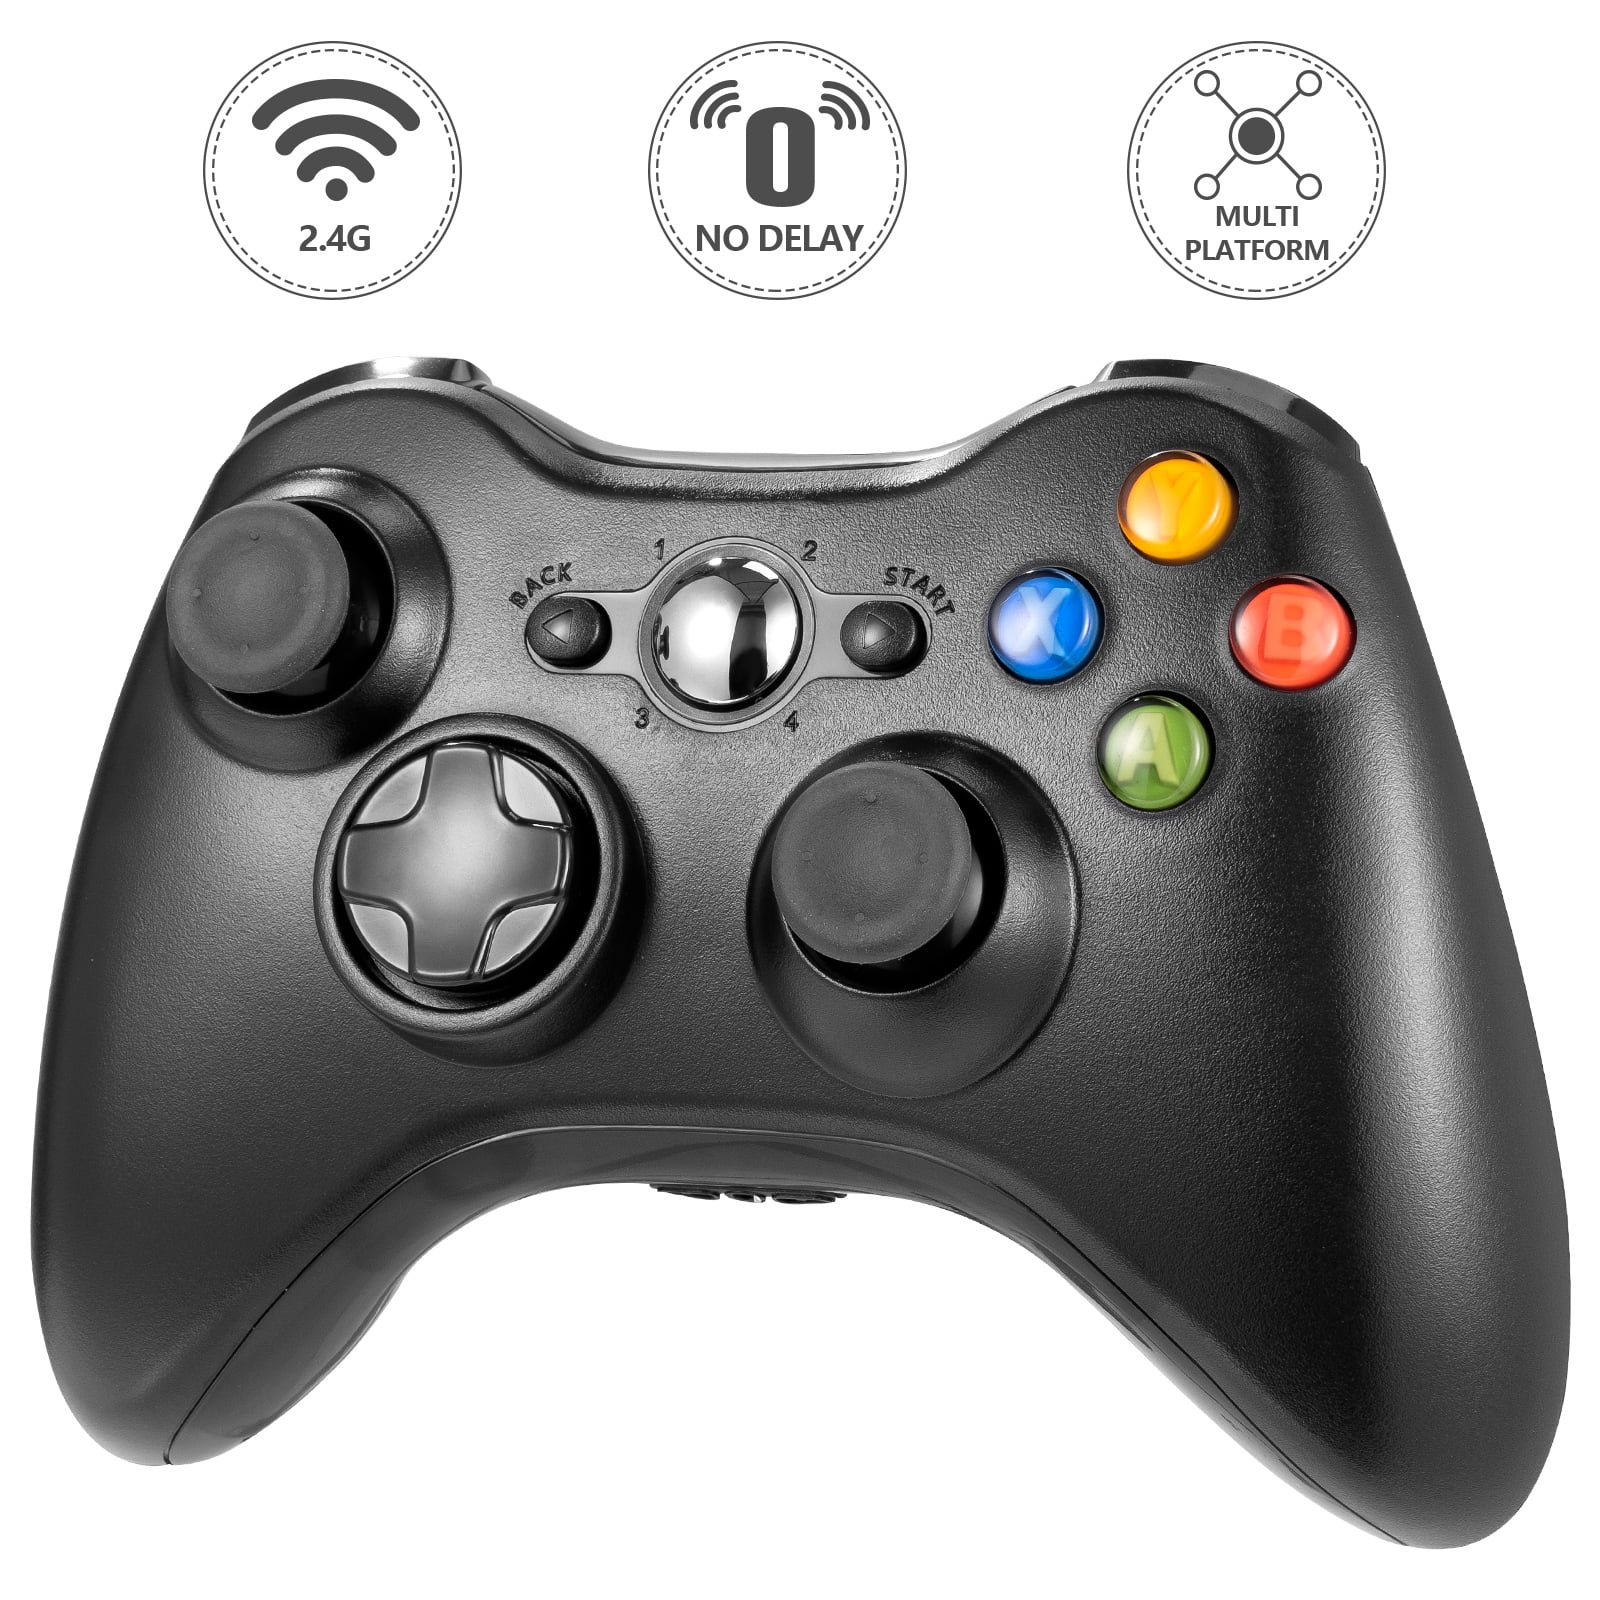 Gamepad Joystick Controller Remote for Xbox 360 Slim Console,Upgraded Joystick/Double Shock Wireless Controller for Xbox 360 Fire-Cloud ,Customized 